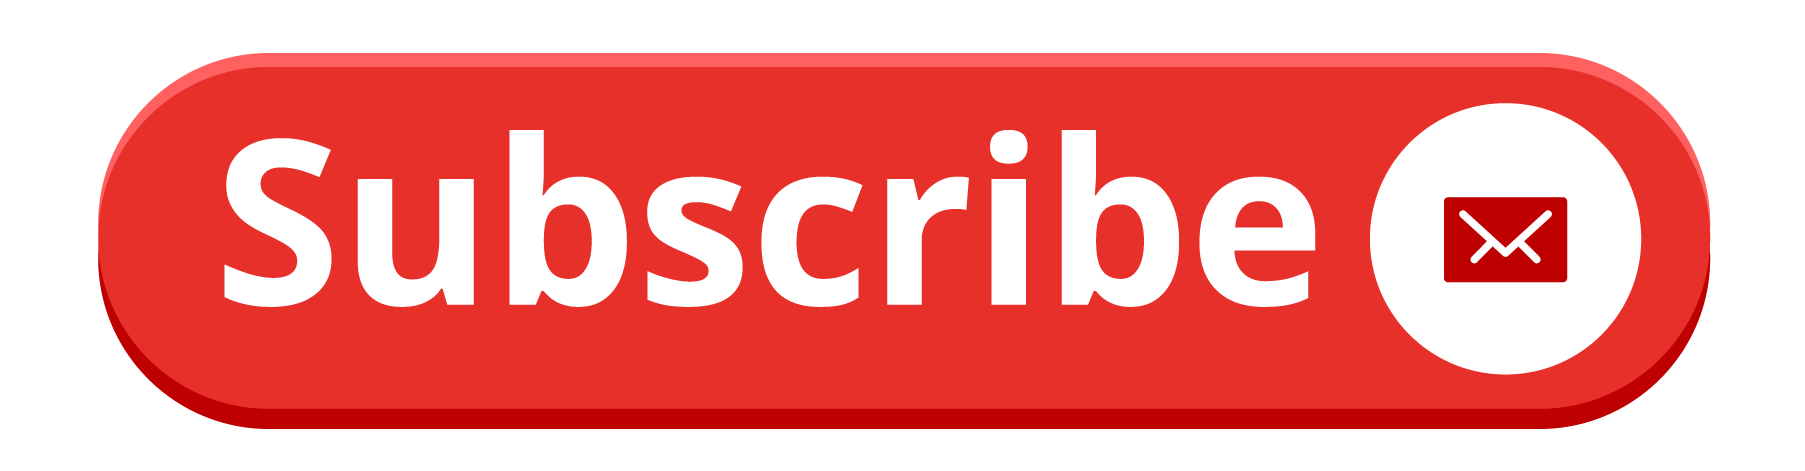 Subscribe to news